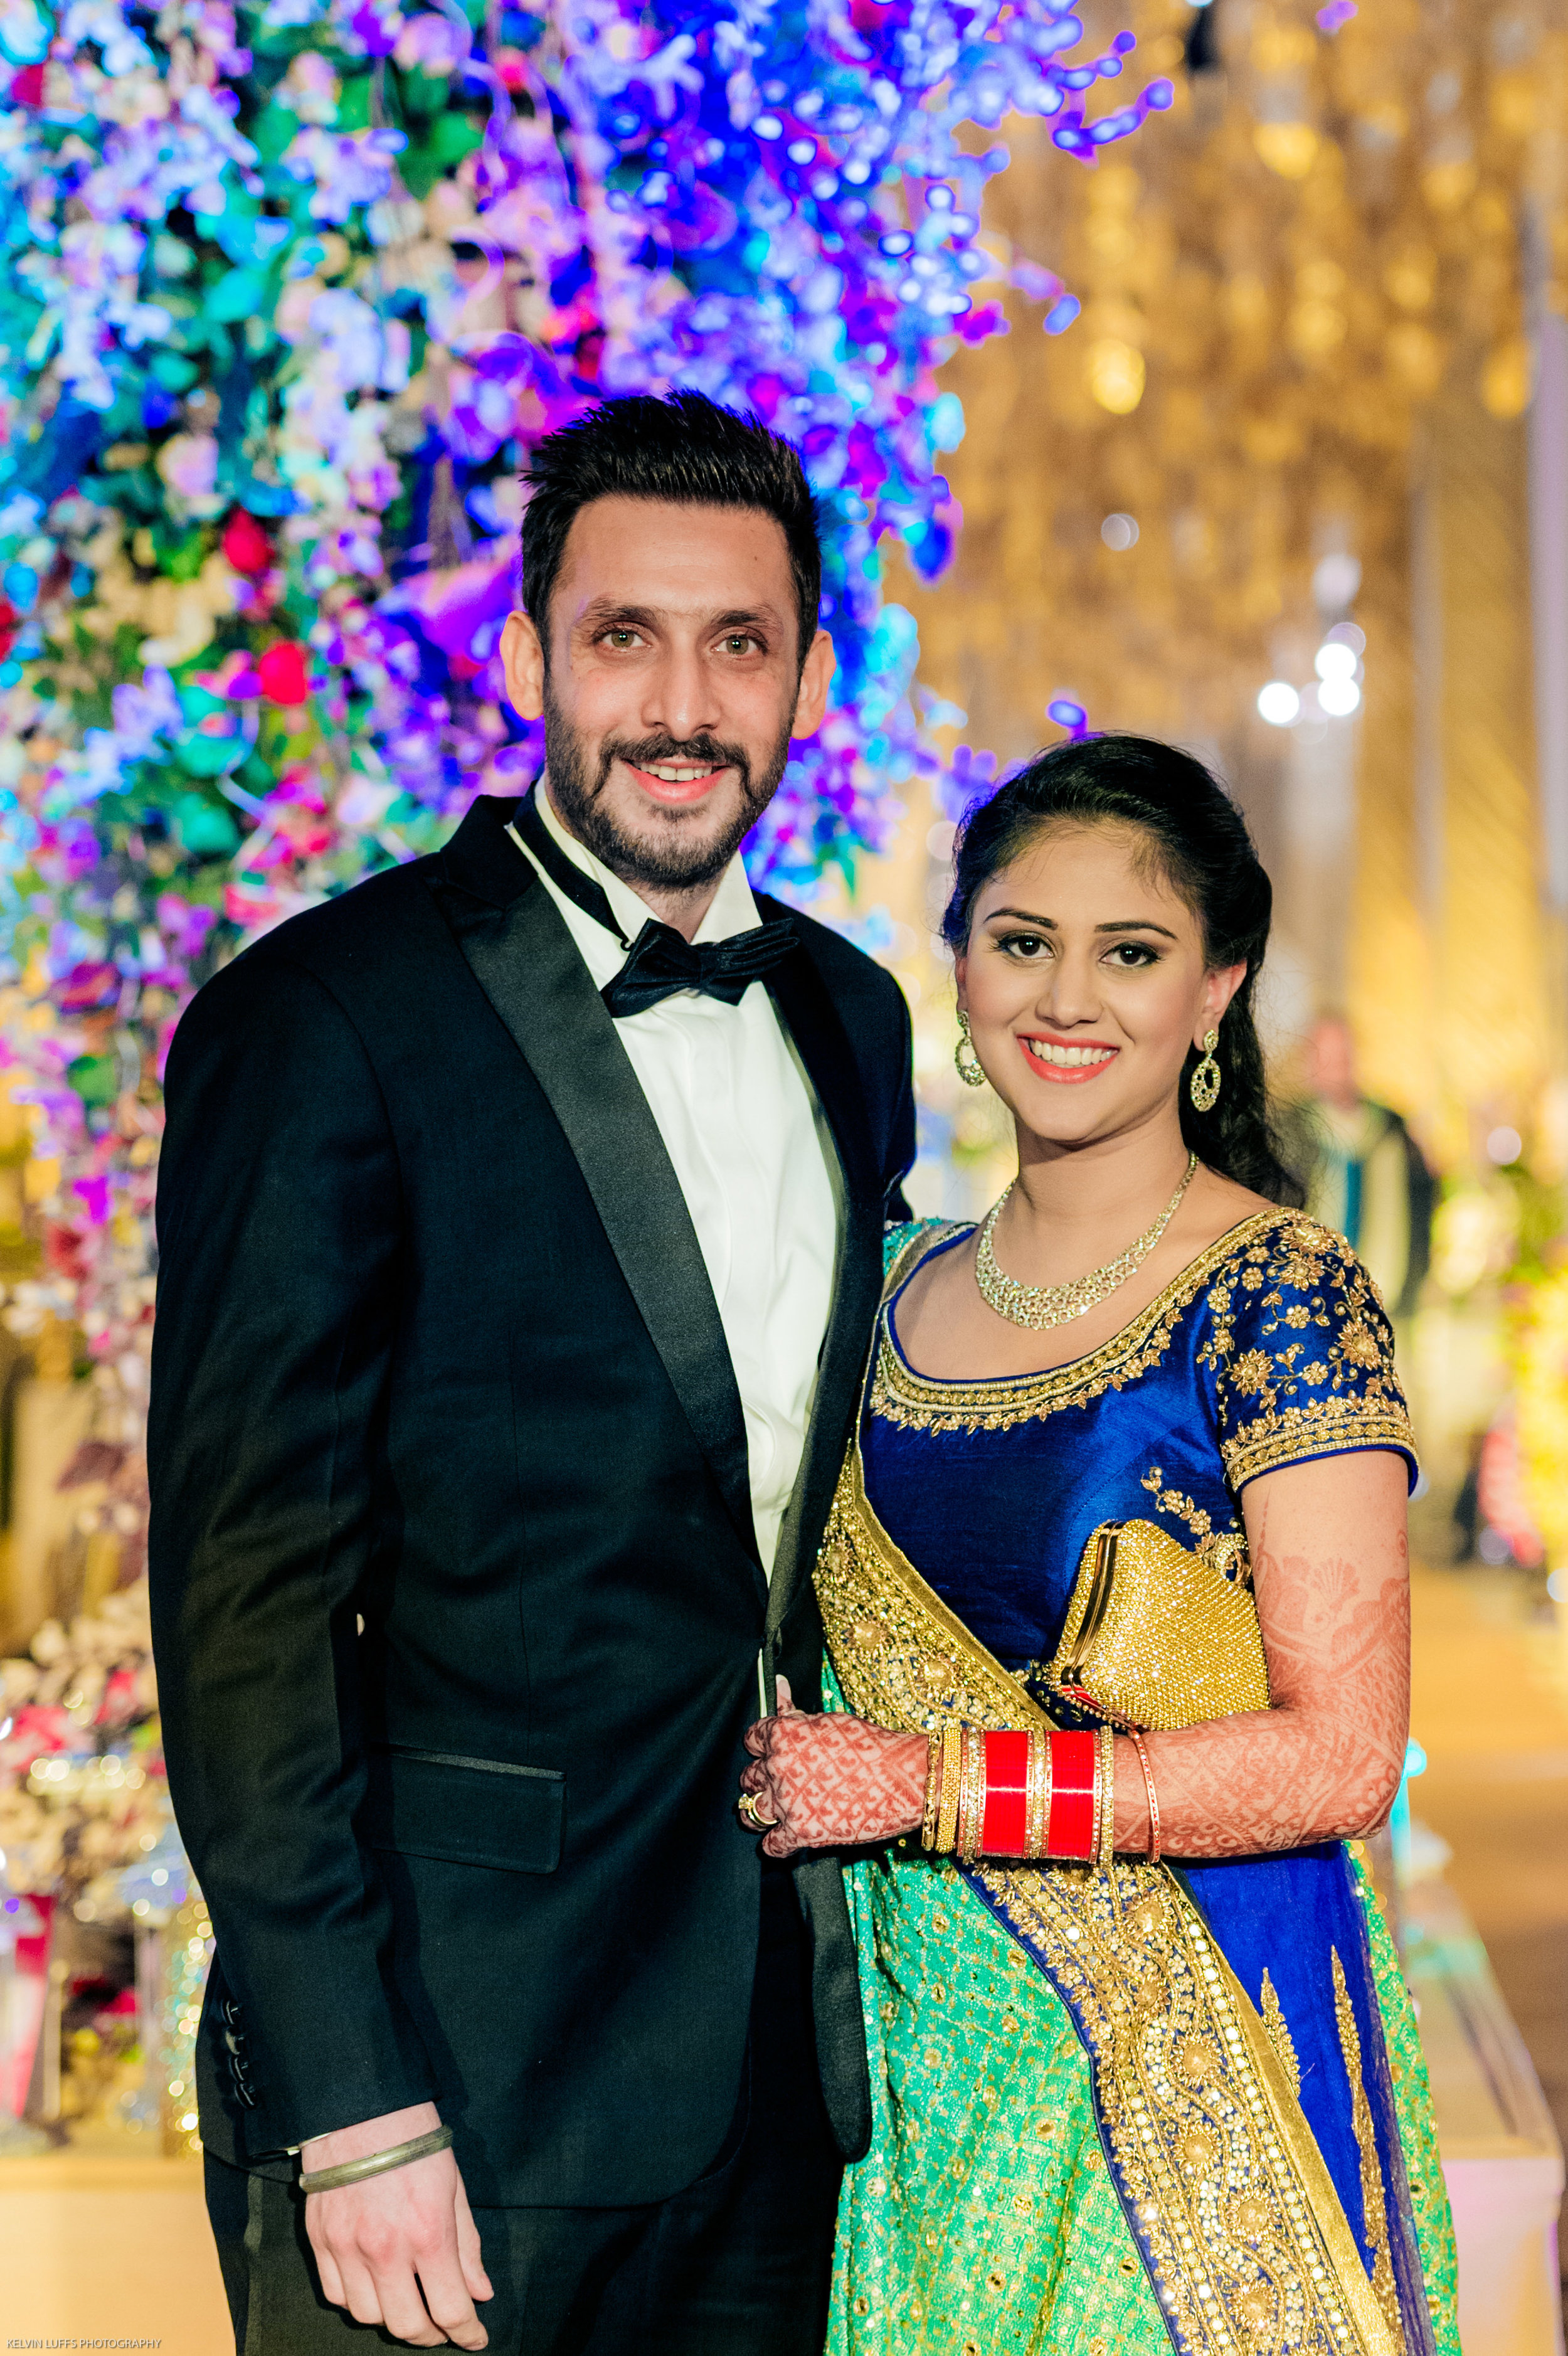  Honestly, I thought they were Bollywood actor and actresses.&nbsp;Such a good looking newly wed couple. 